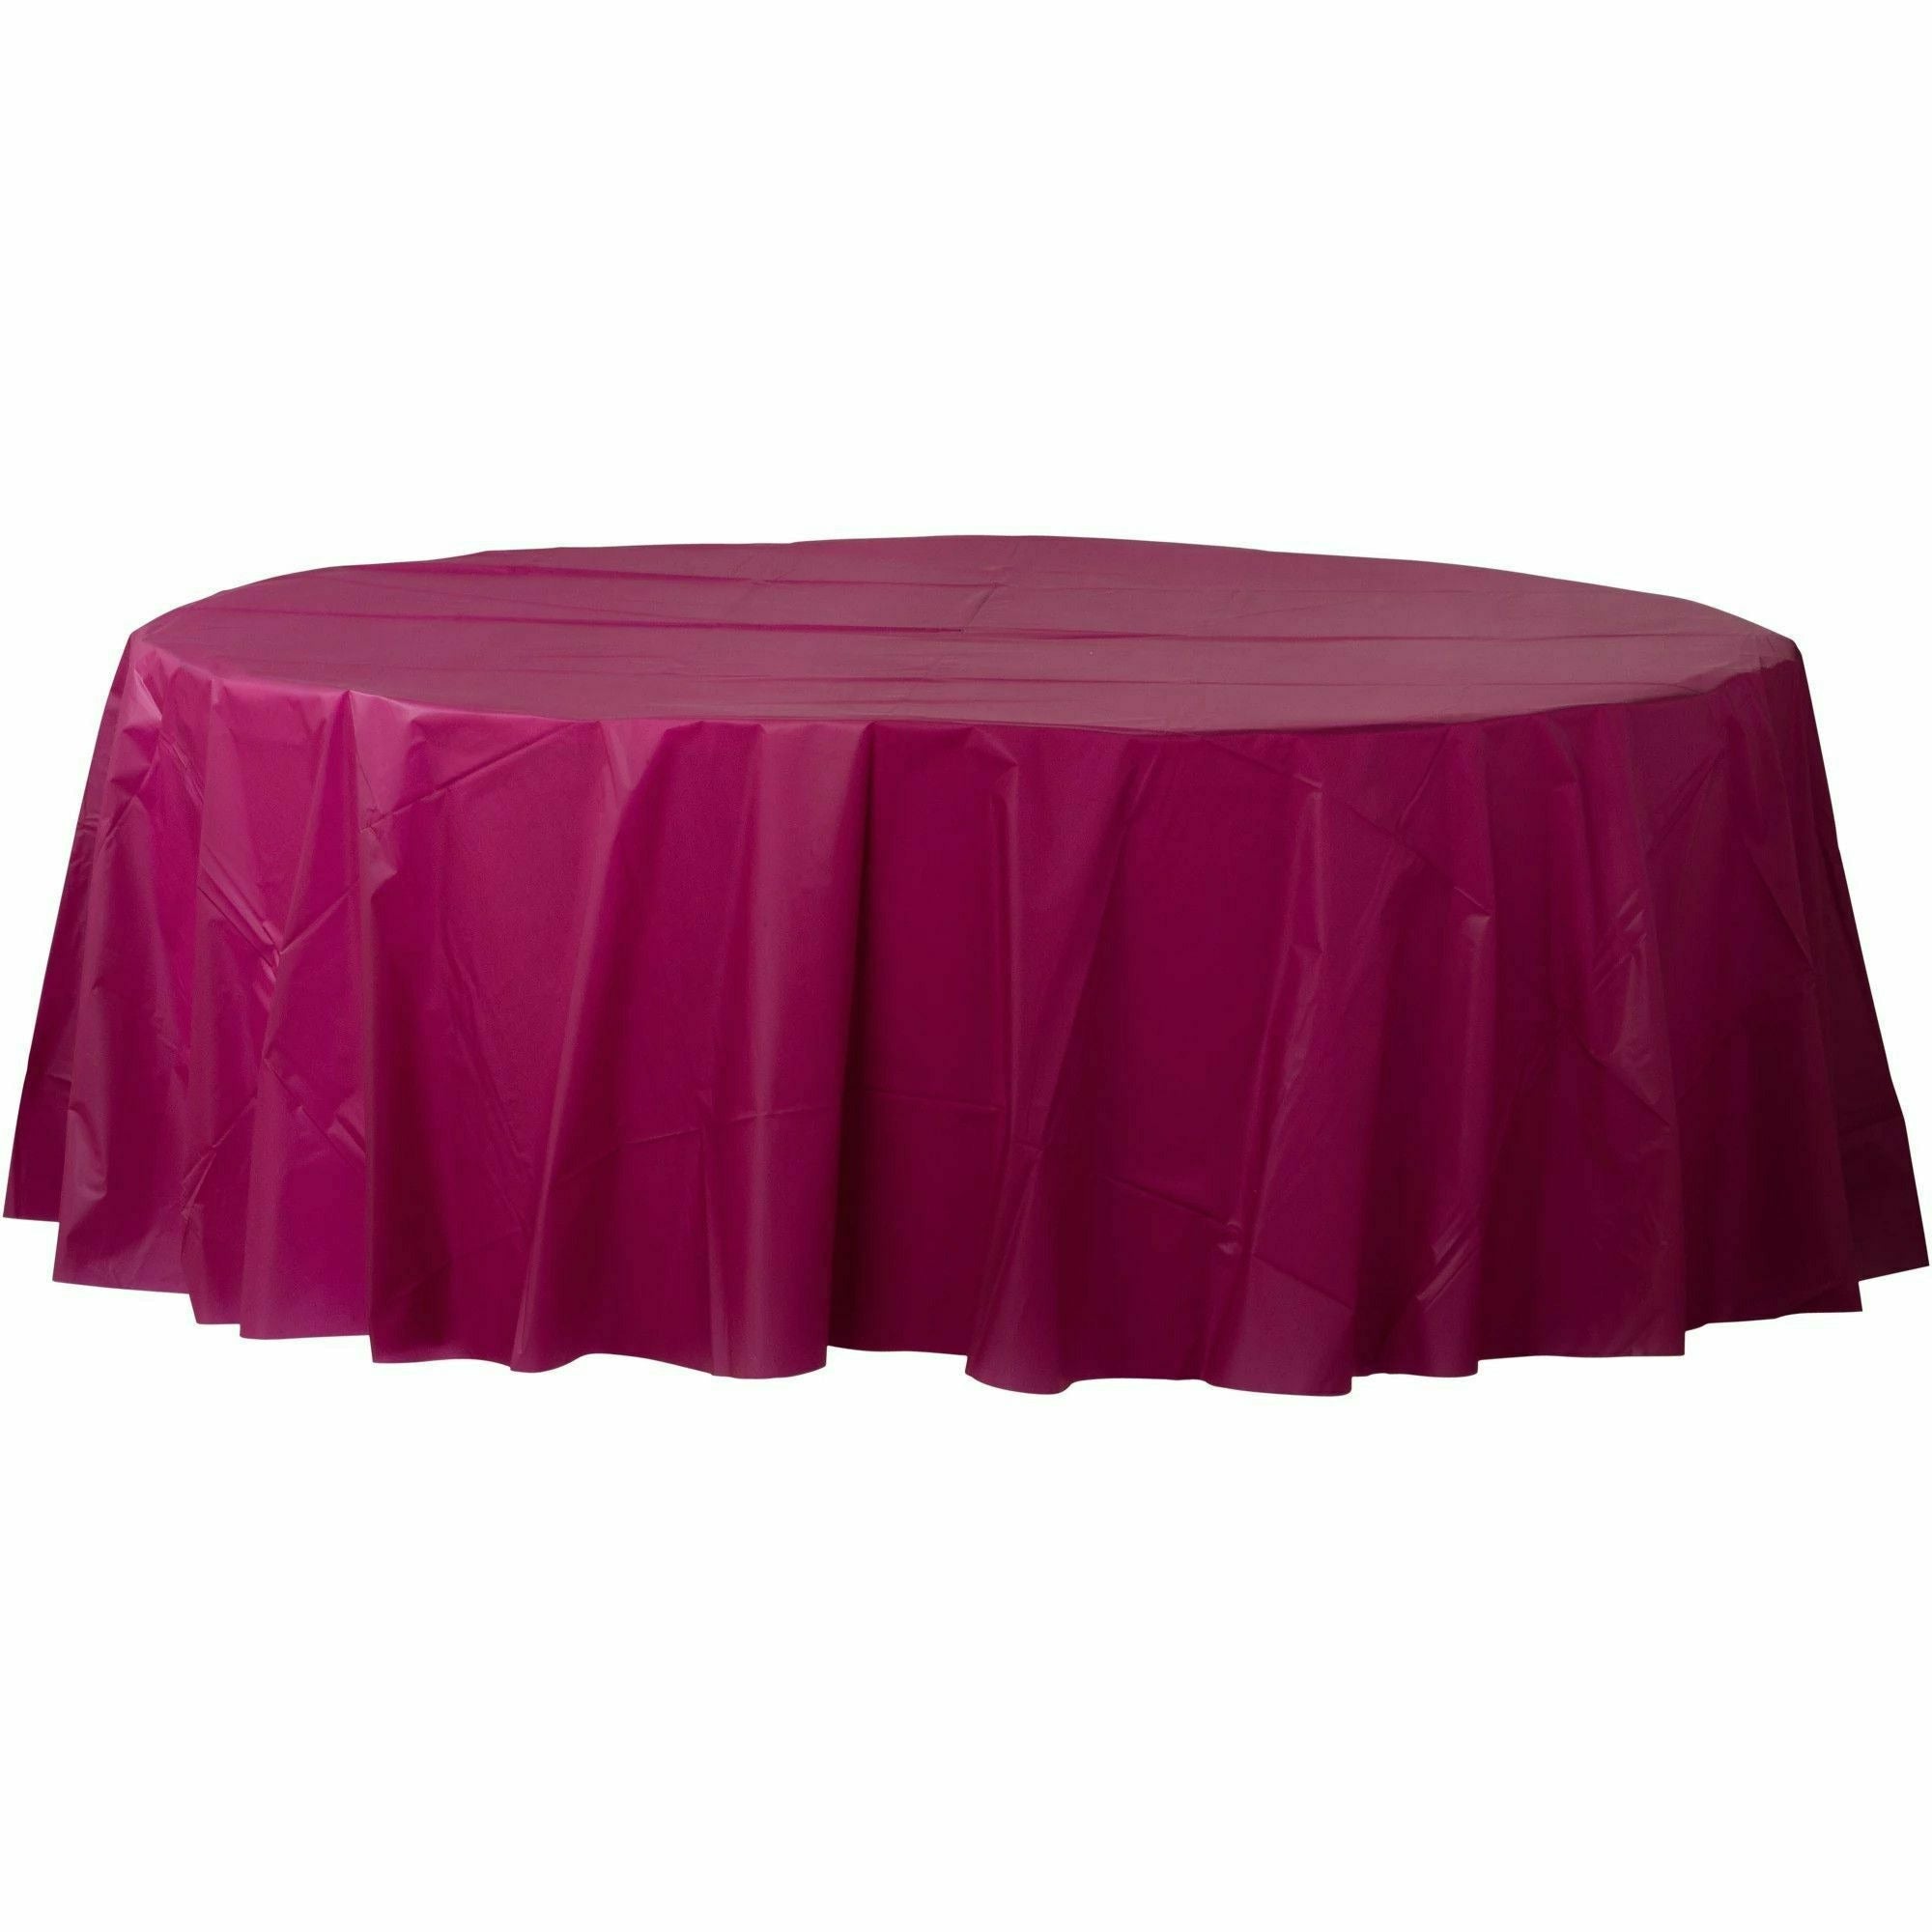 Amscan BASIC Berry - 84" Round Plastic Table Cover